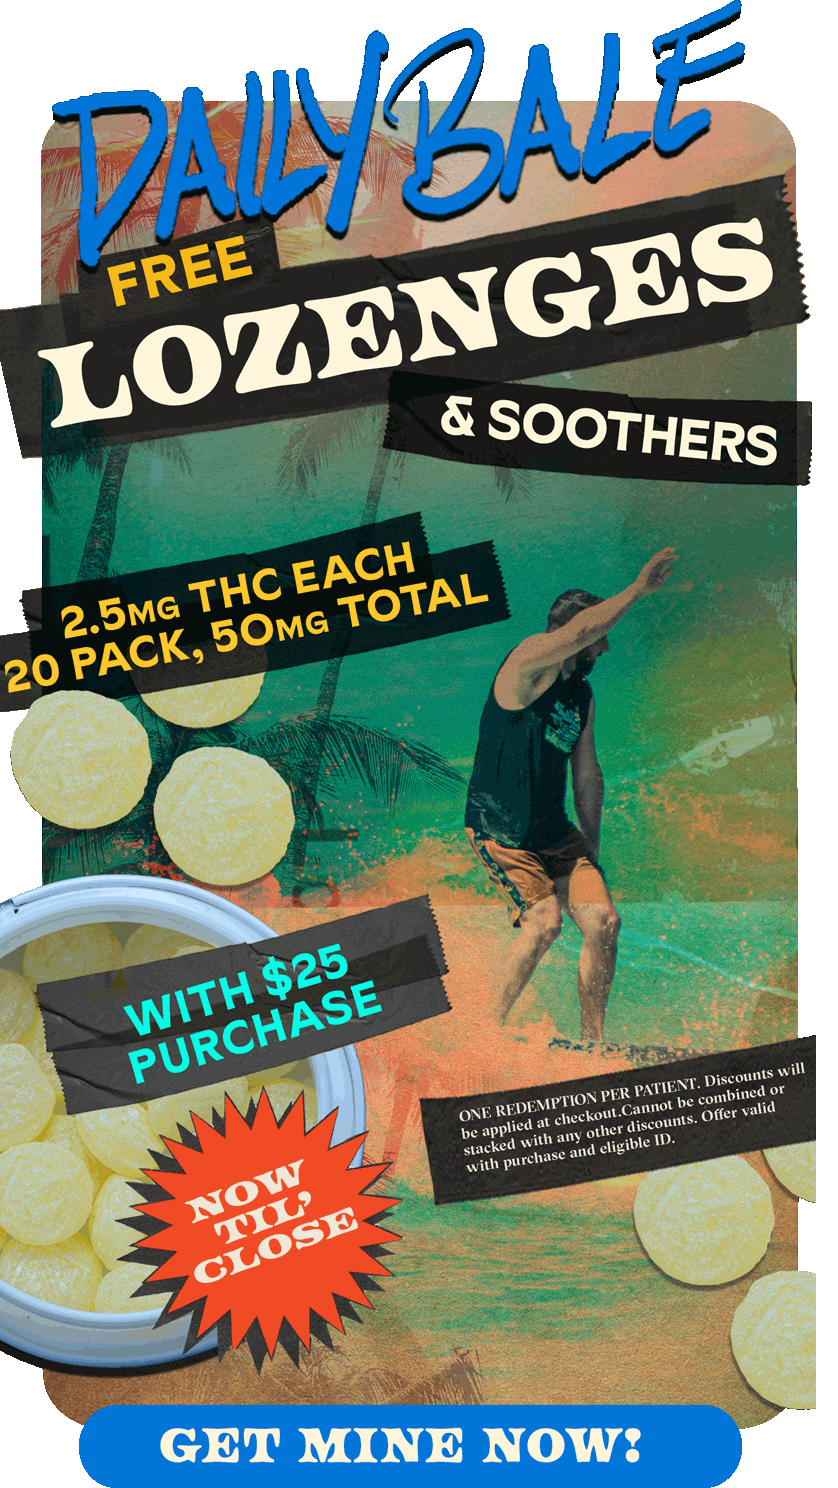 Daily Bale Free Lozenges With $25 Purchase 3